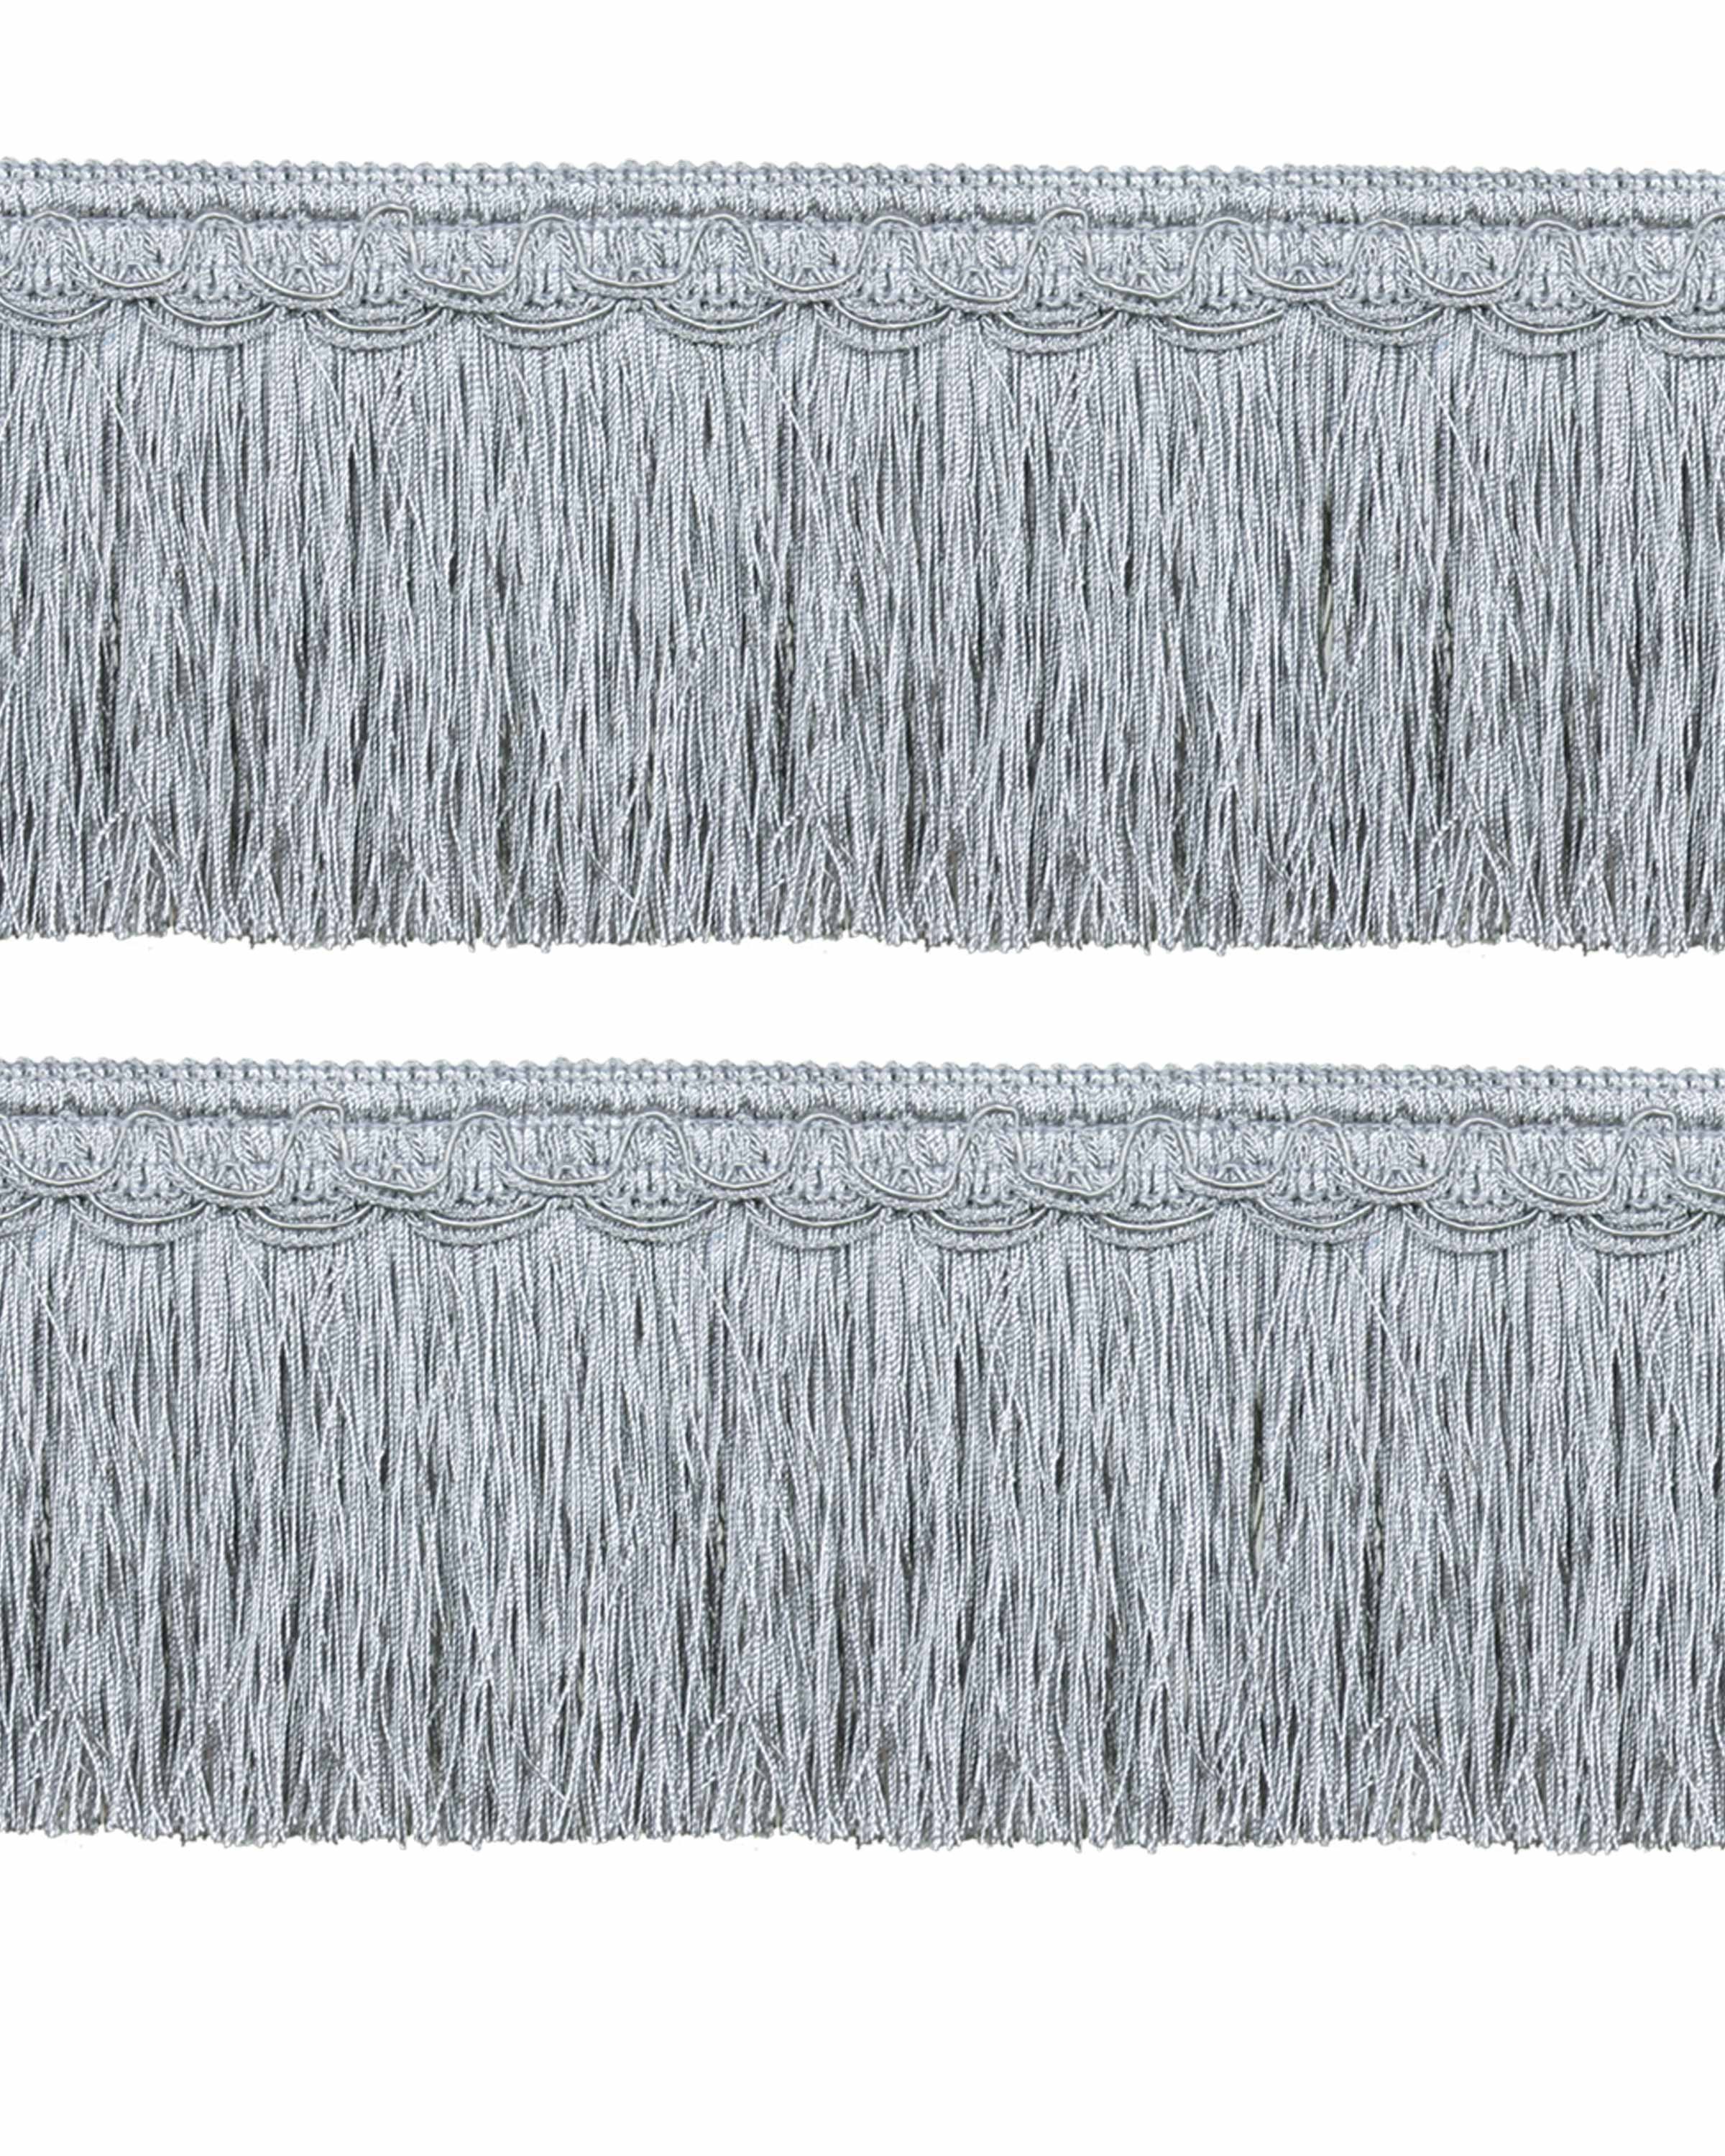 Bullion Fringe on Fancy Braid - French Silver Blue 130mm Price is for 5 metres